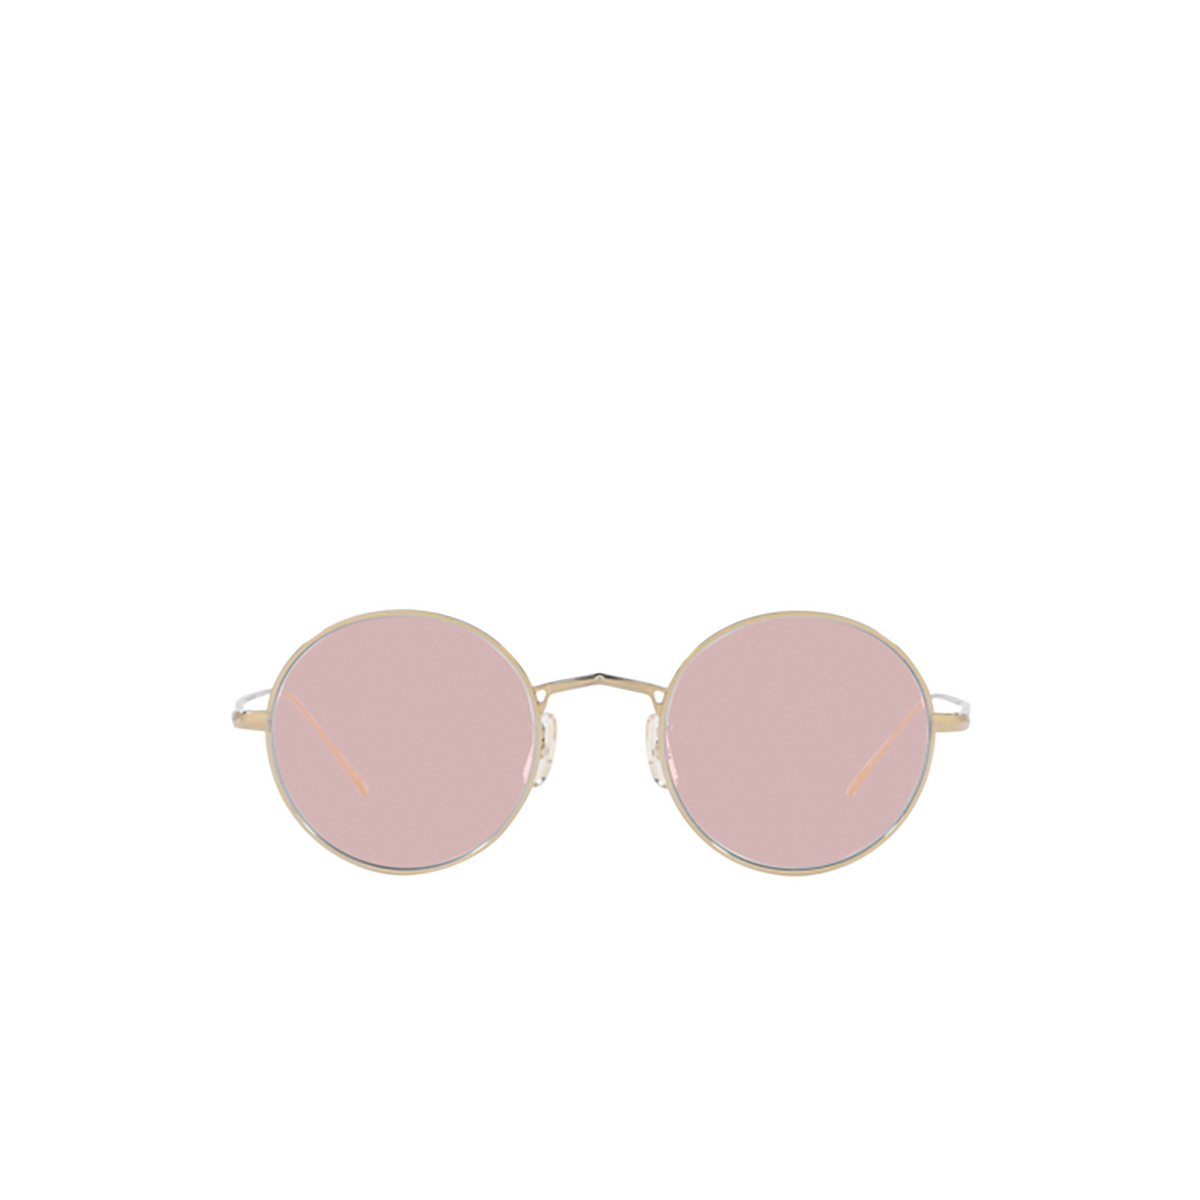 Oliver Peoples G. PONTI-3 Sunglasses 50354Q Soft gold - front view